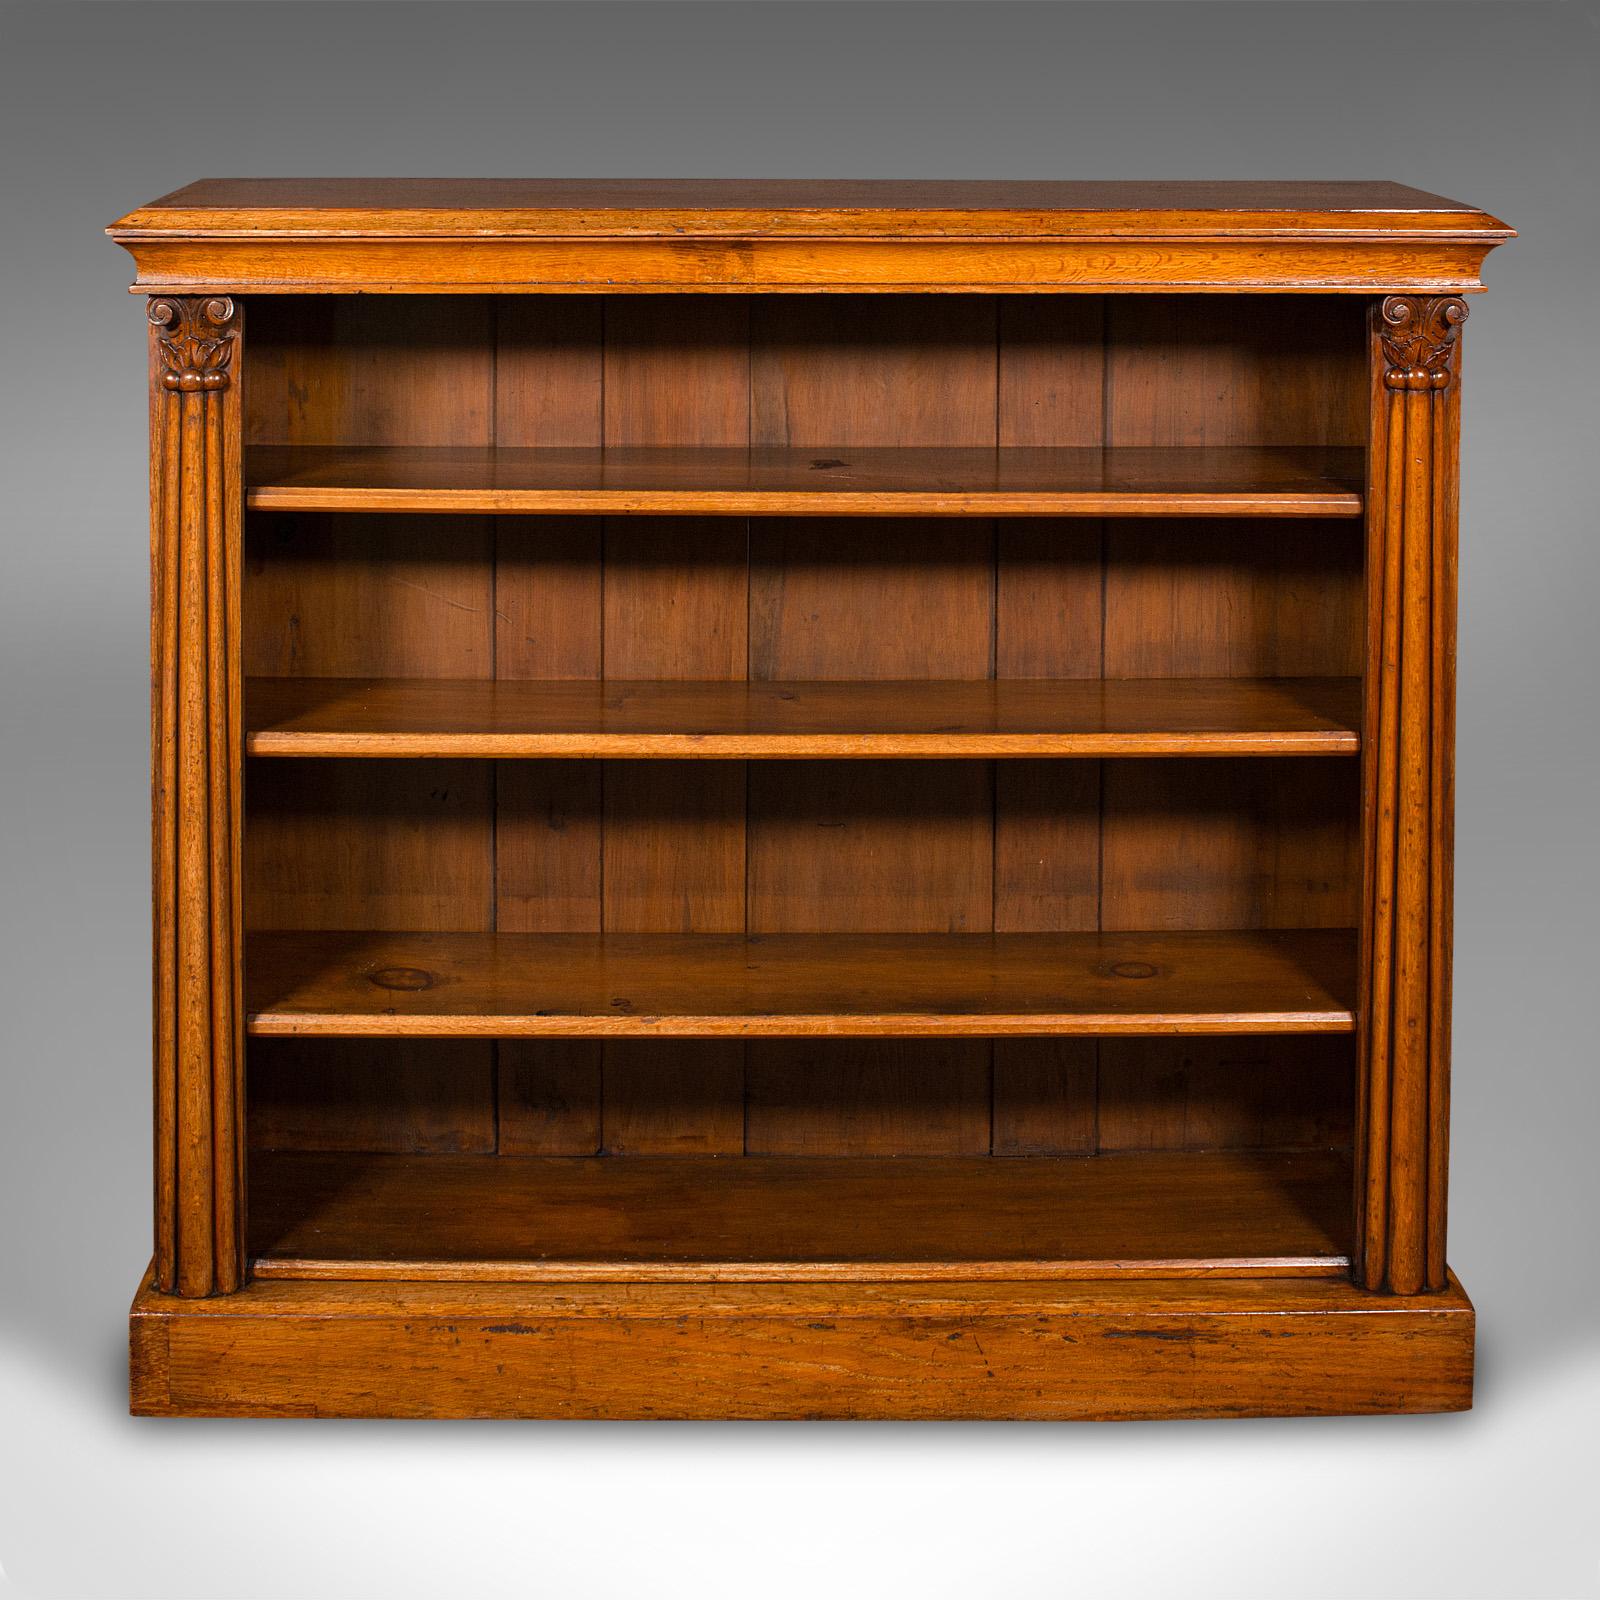 This is an antique open bookcase. A Scottish, oak adjustable book shelf cabinet, dating to the early Victorian period, circa 1850.

Showcase your favourite titles in this delightful open bookcase
Displaying a desirable aged patina and in good